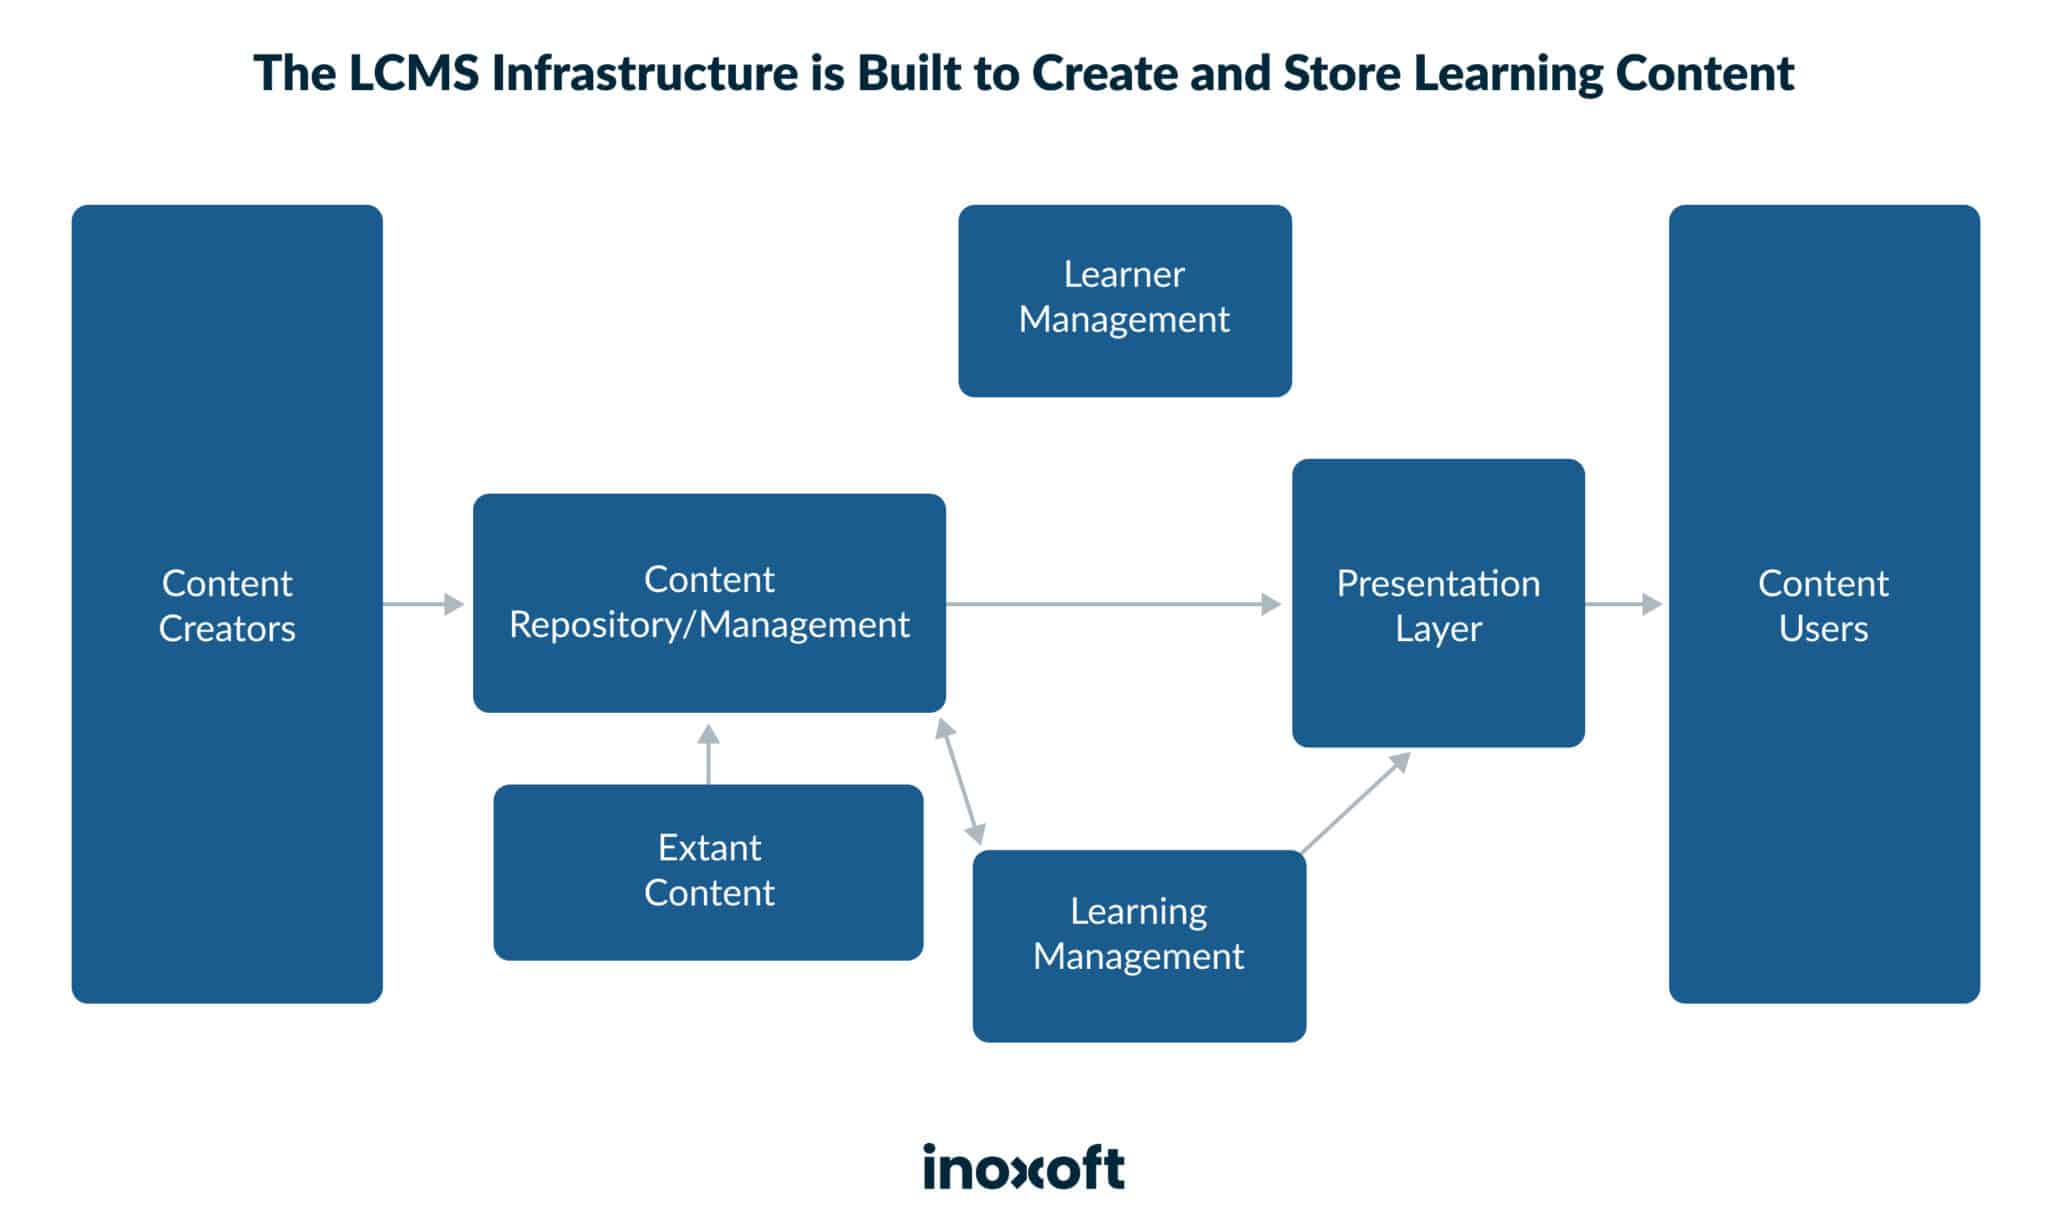 The LCMS infrastructure is built to create and store learning content.